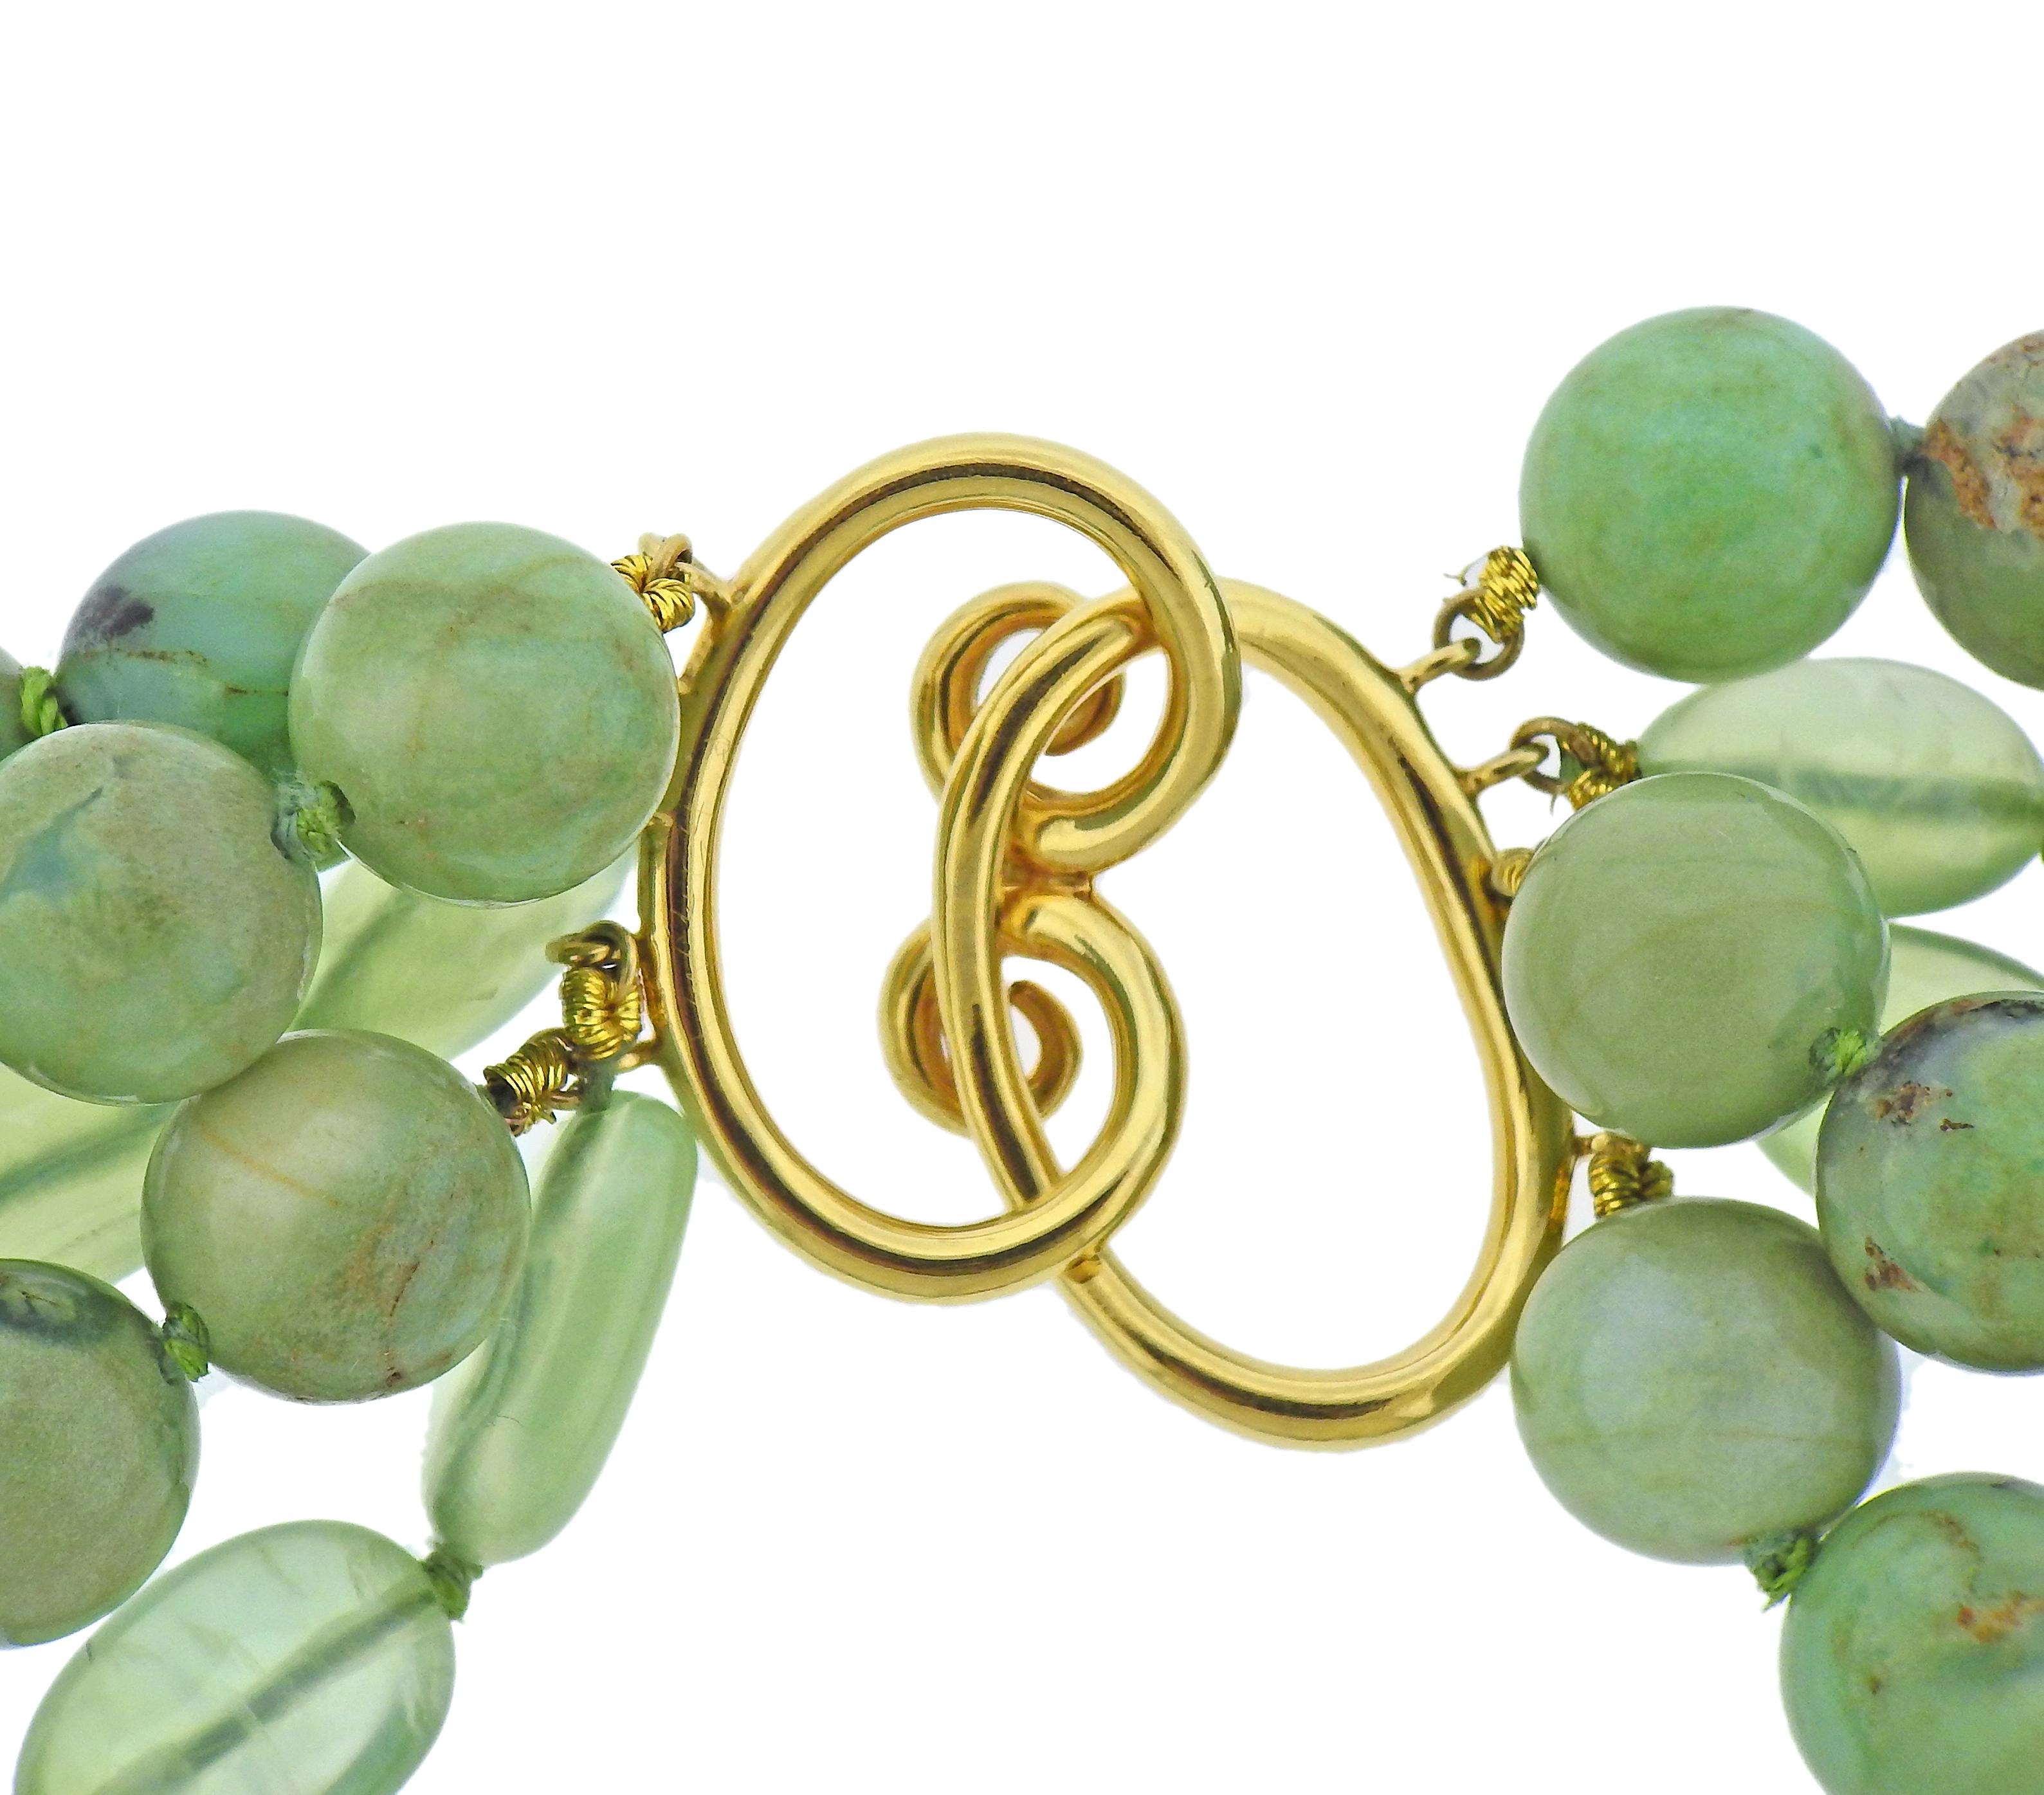 18k gold torsade necklace by Verdura, with green gemstones, pearls, citrines and tsavorites. Necklace is 18